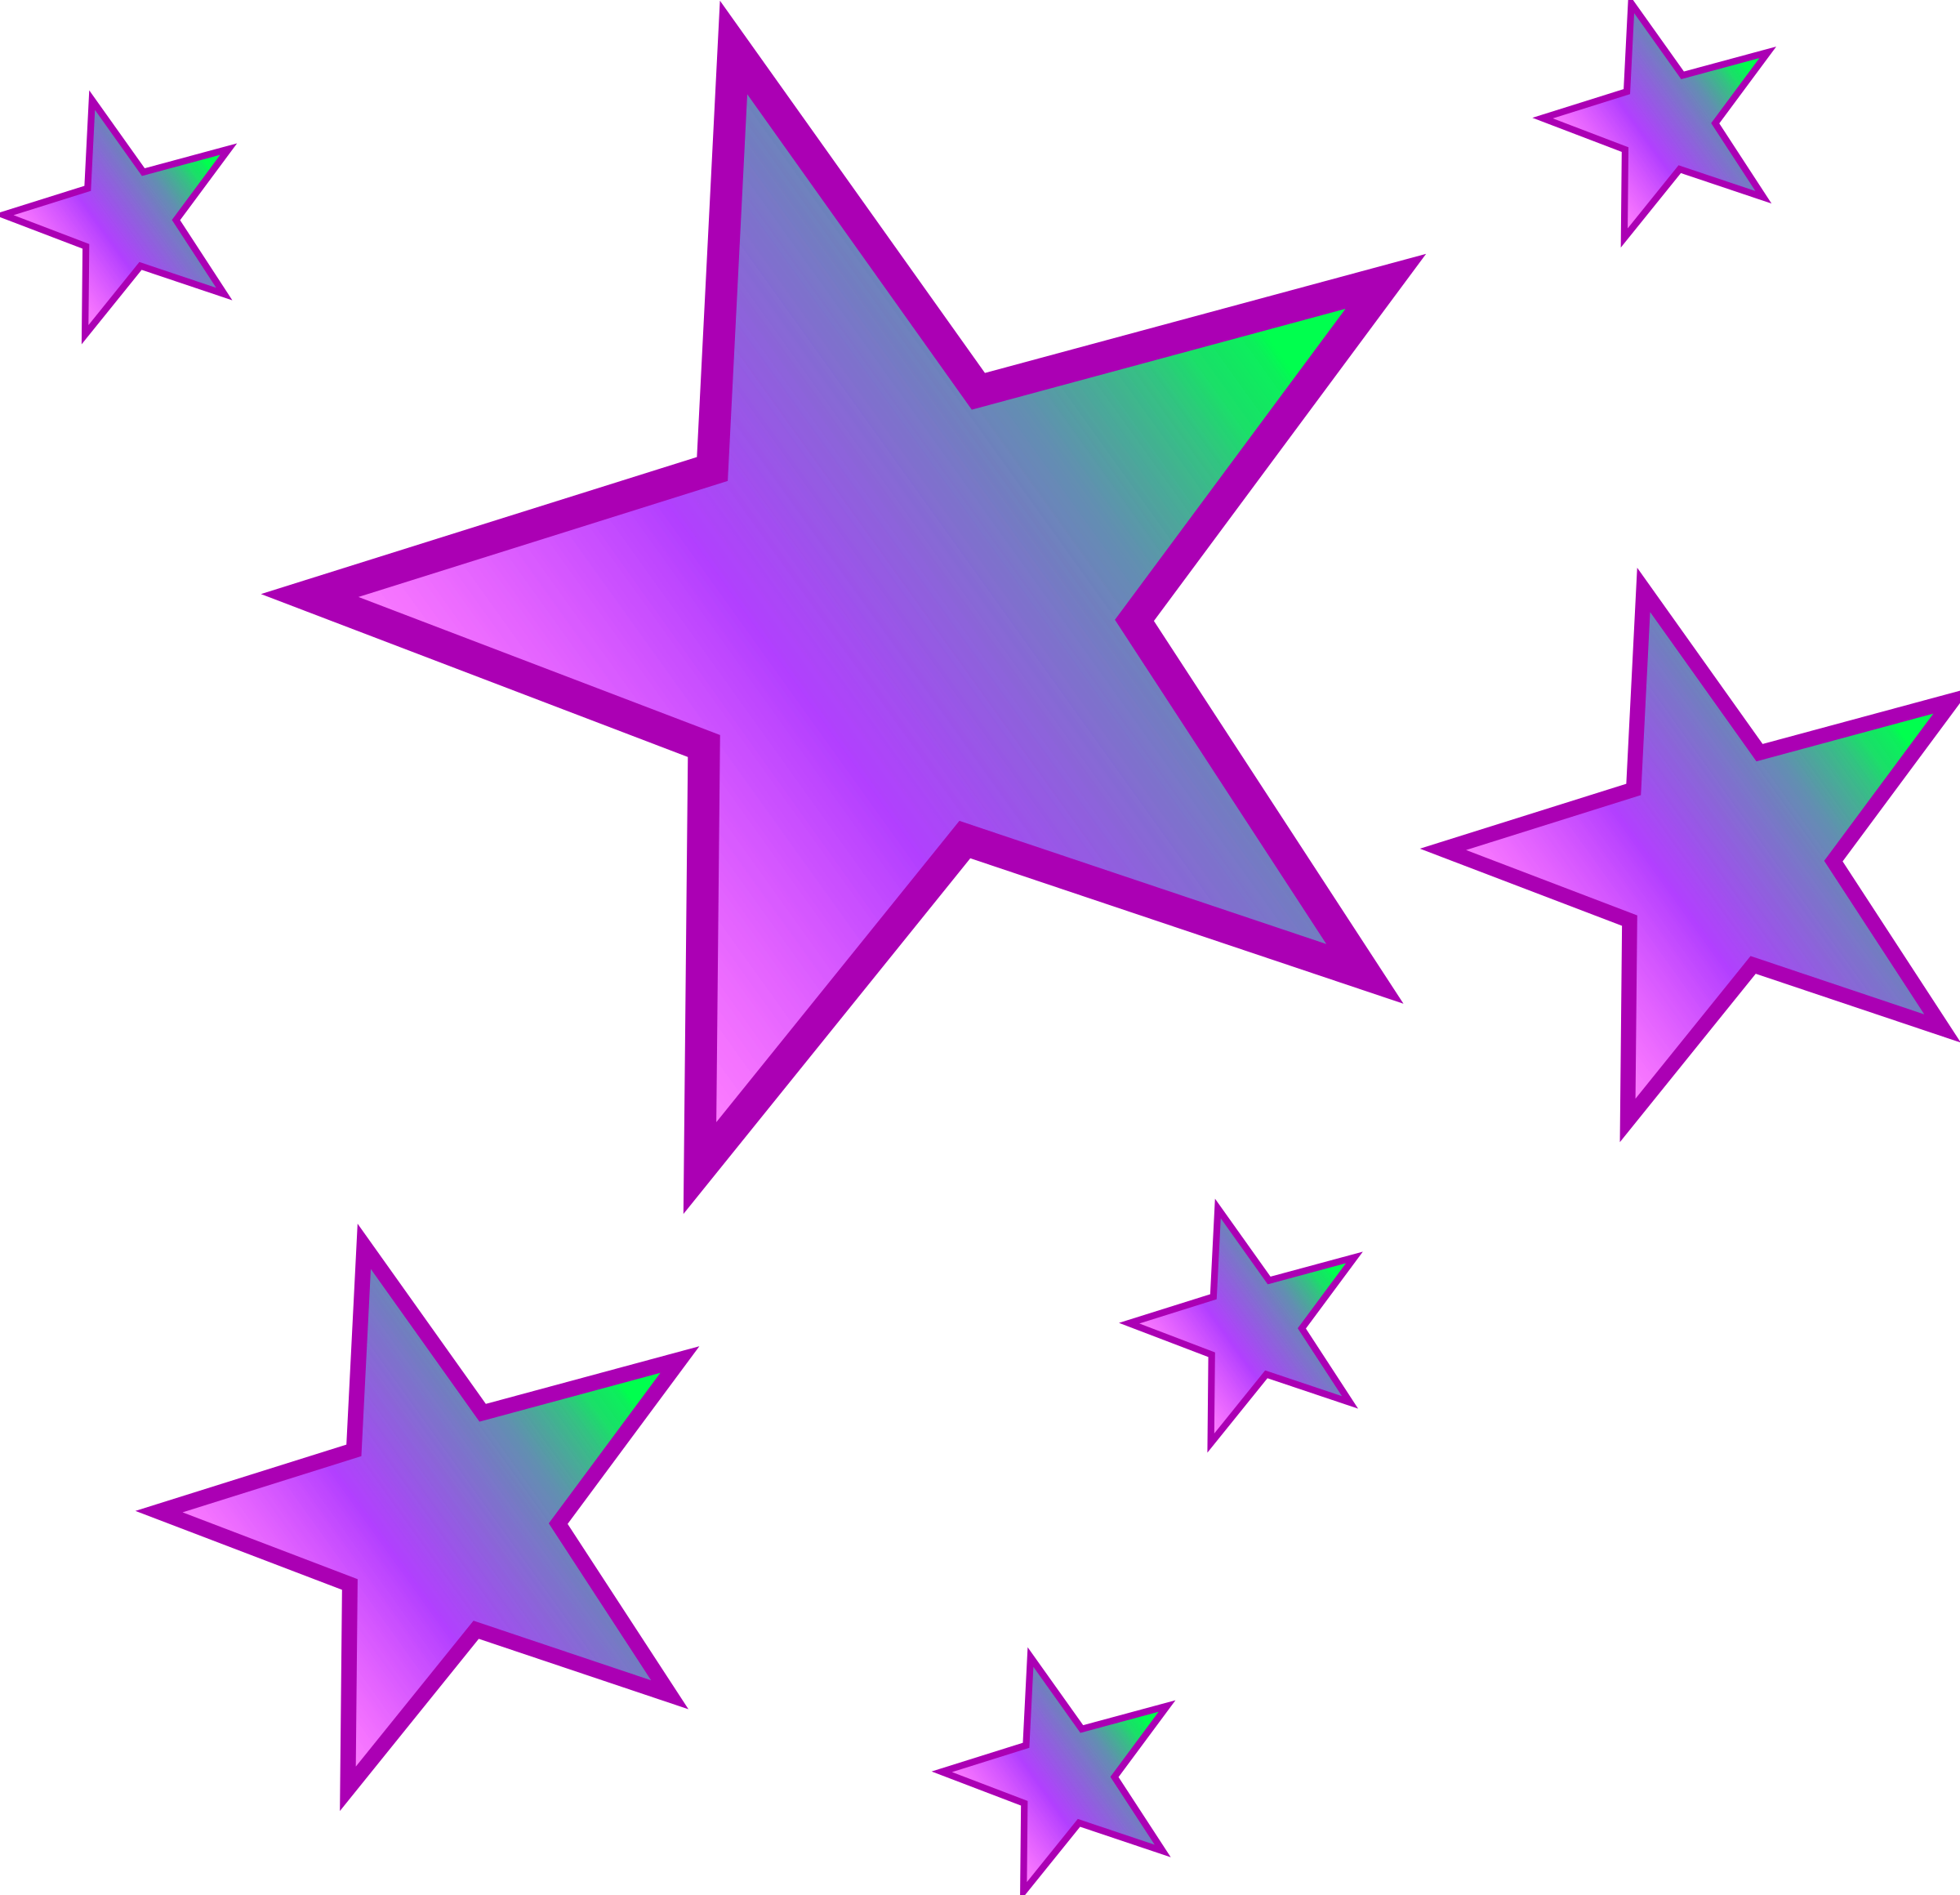 Clip Arts Related To : colorful stars clipart. view all Service Star Clip.....